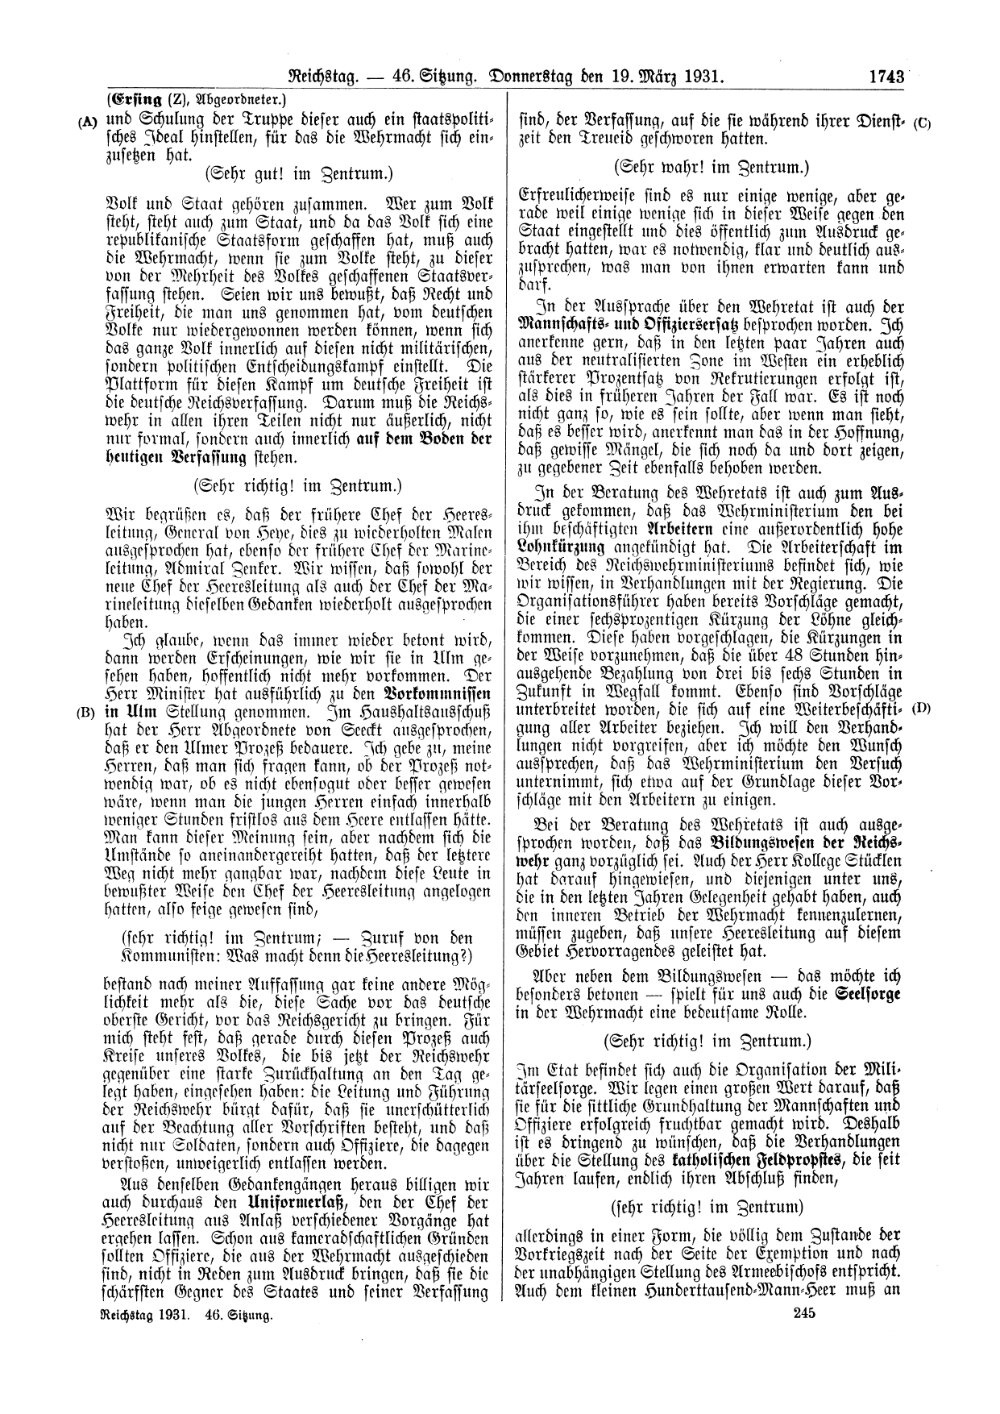 Scan of page 1743